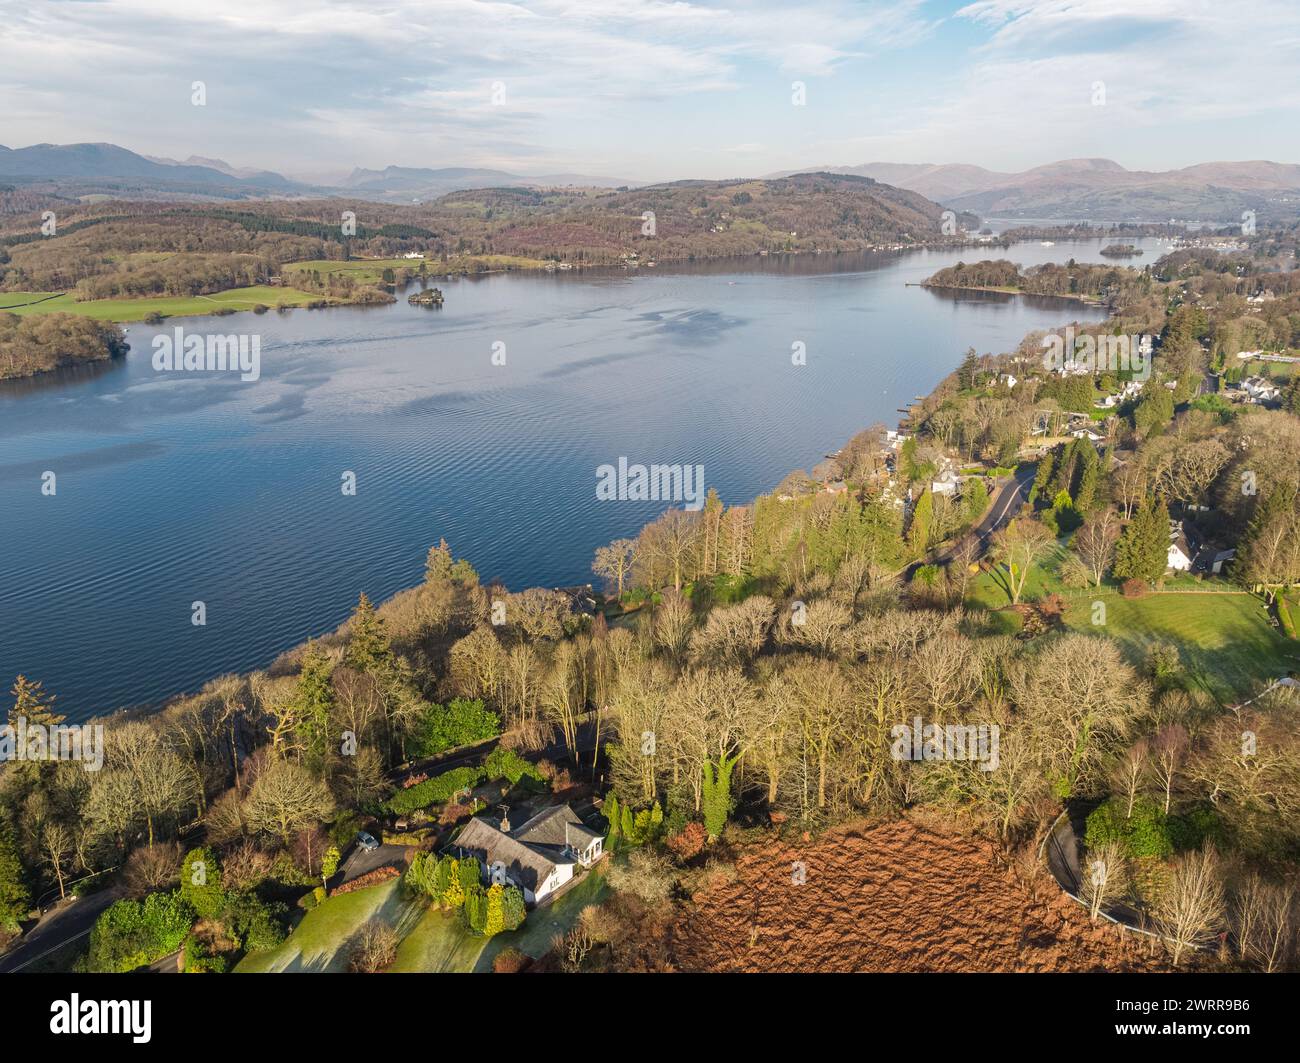 Aerial photograph of Lake Windermere, Cumbria, UK with the Lake District's hills and mountains in the distance Stock Photo